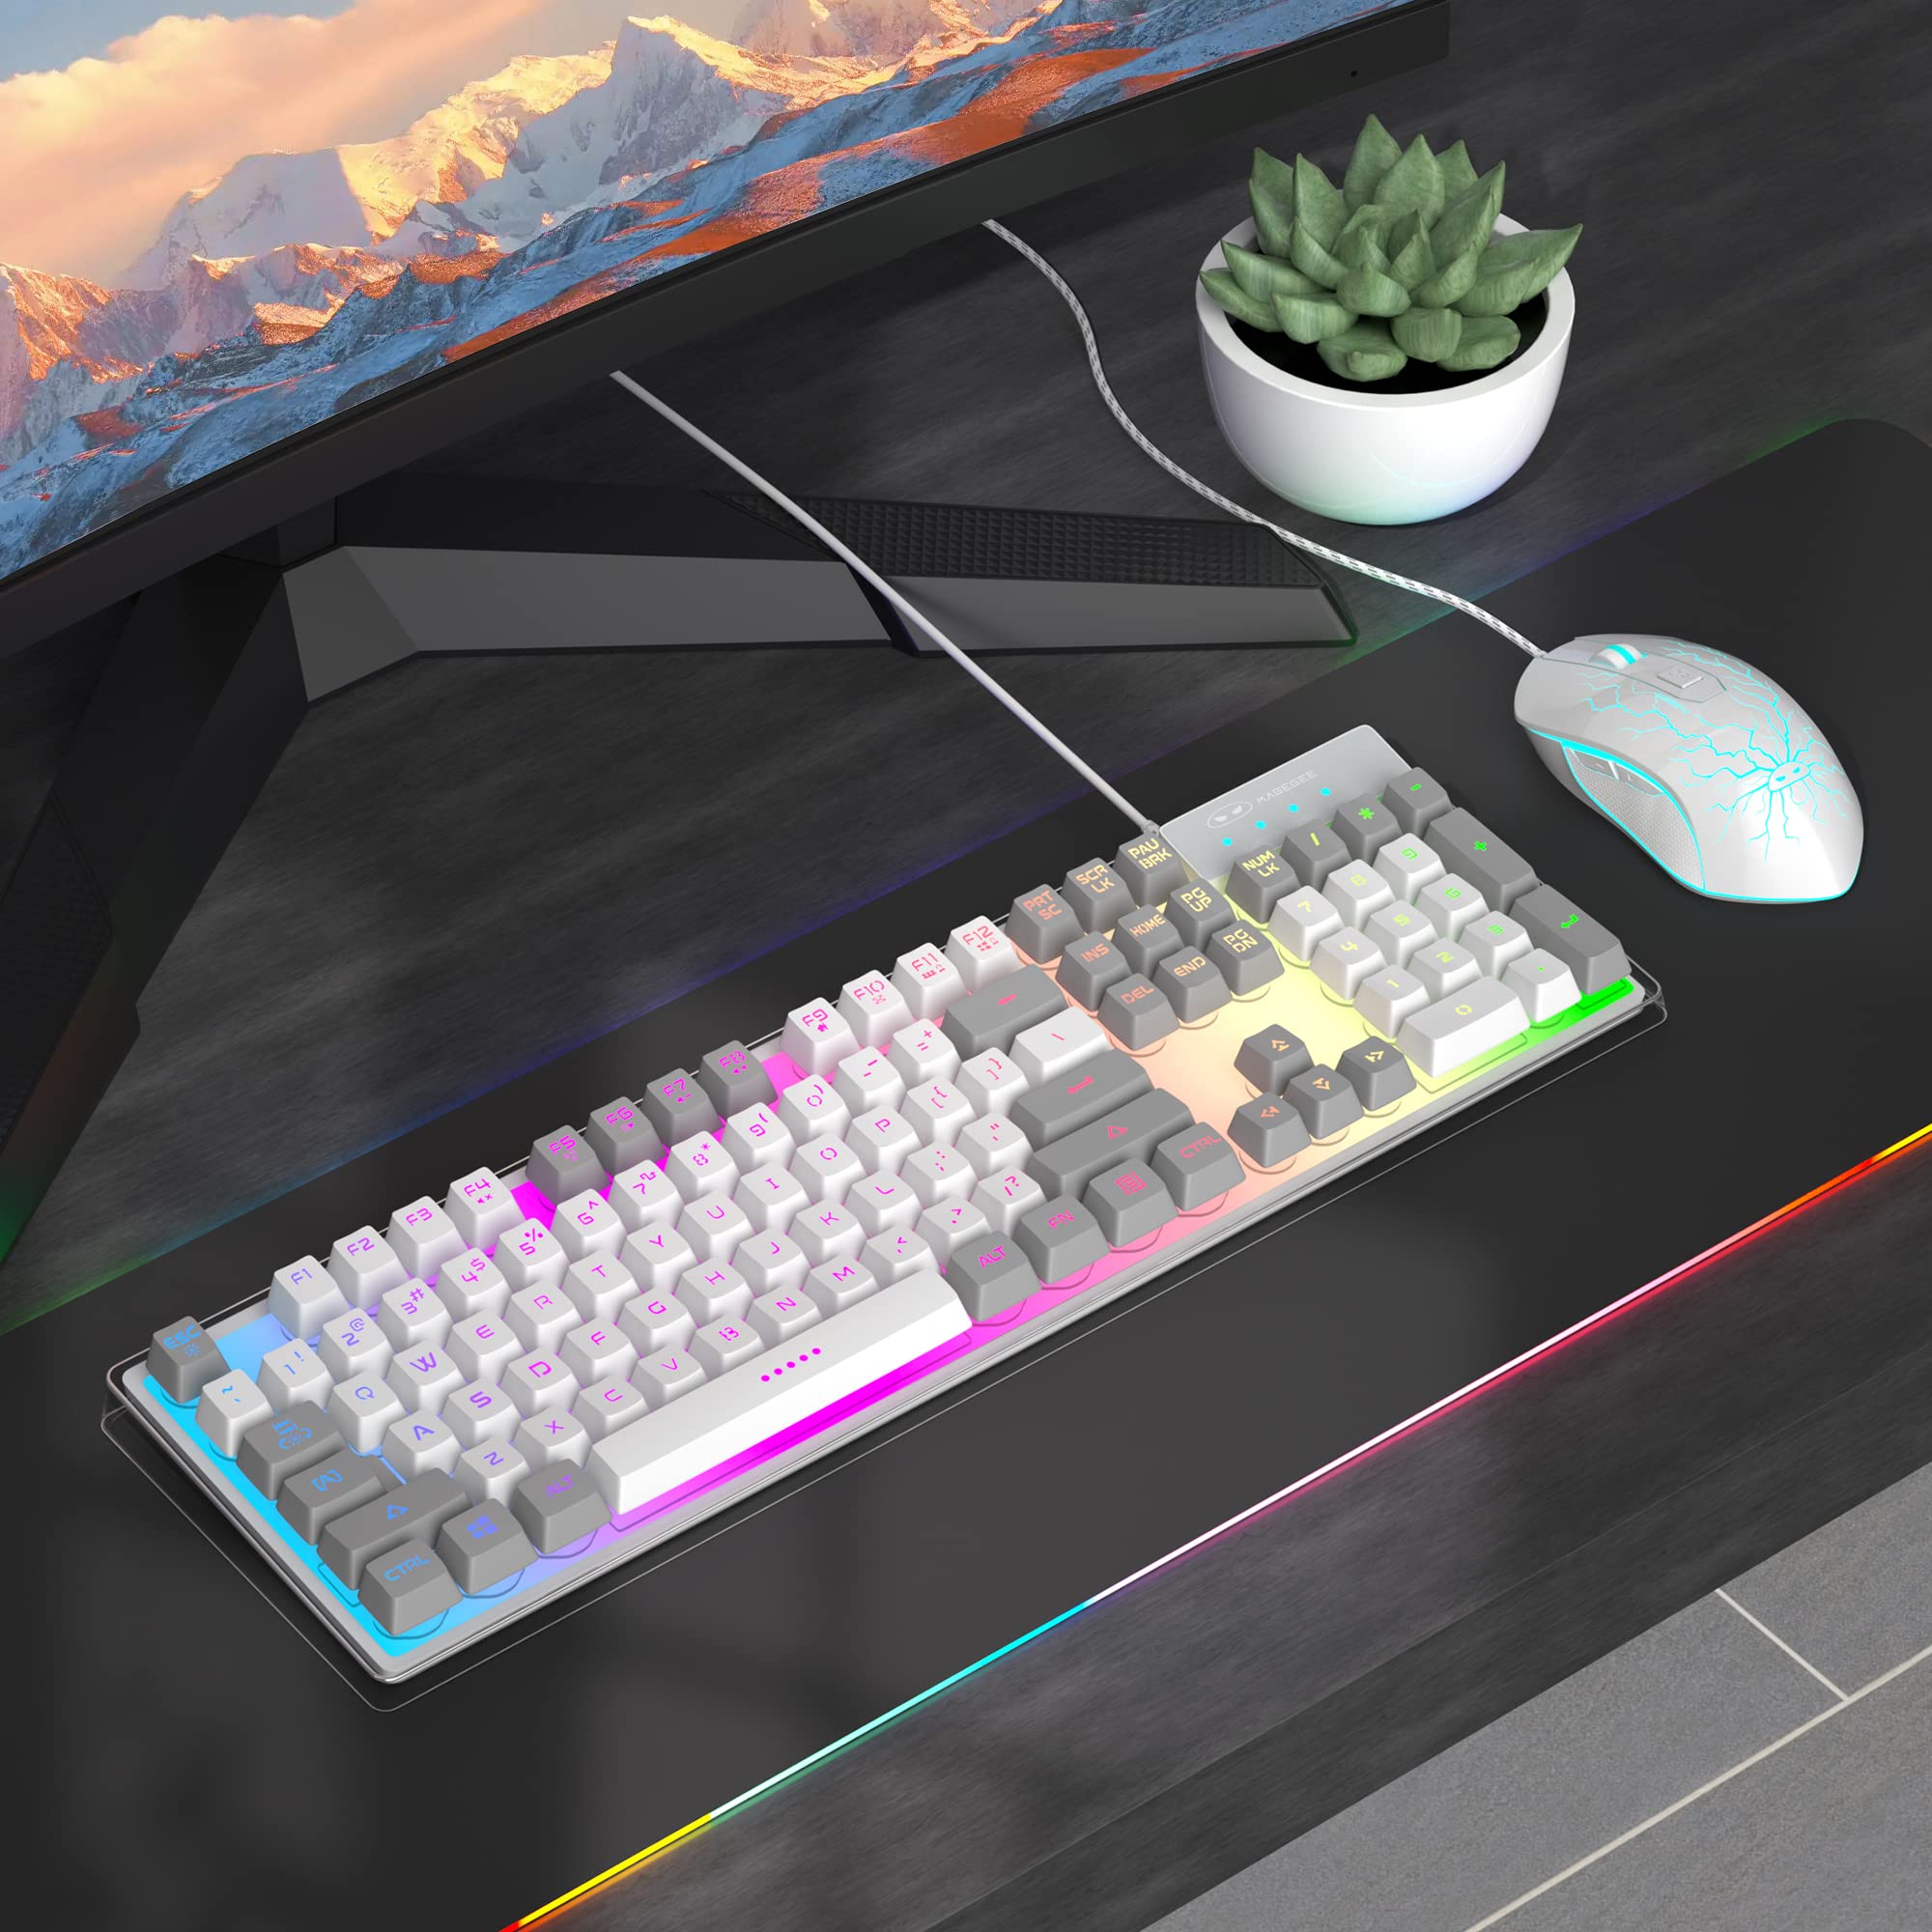 MageGee Gaming Keyboard and Mouse Combo, K1 LED Rainbow Backlit Keyboard with 104 Key Computer PC Gaming Keyboard for PC/Laptop(Gray & White)